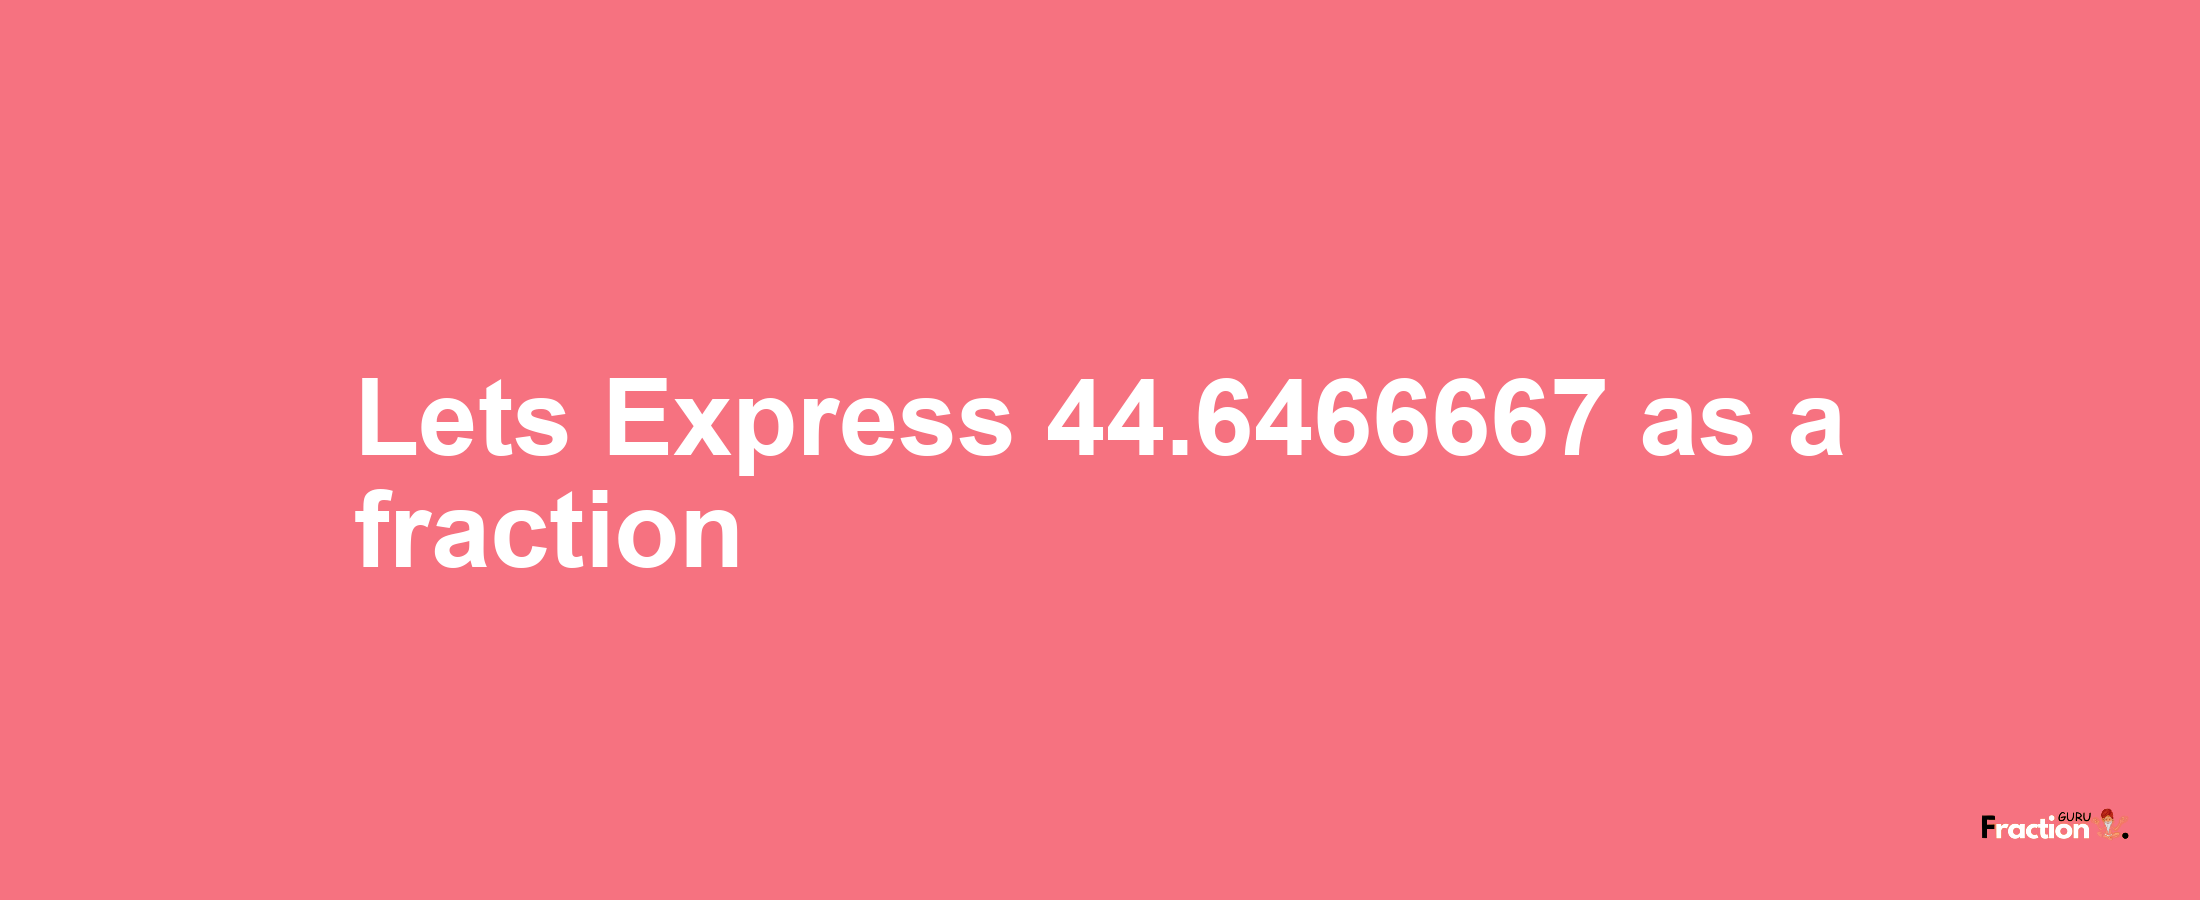 Lets Express 44.6466667 as afraction